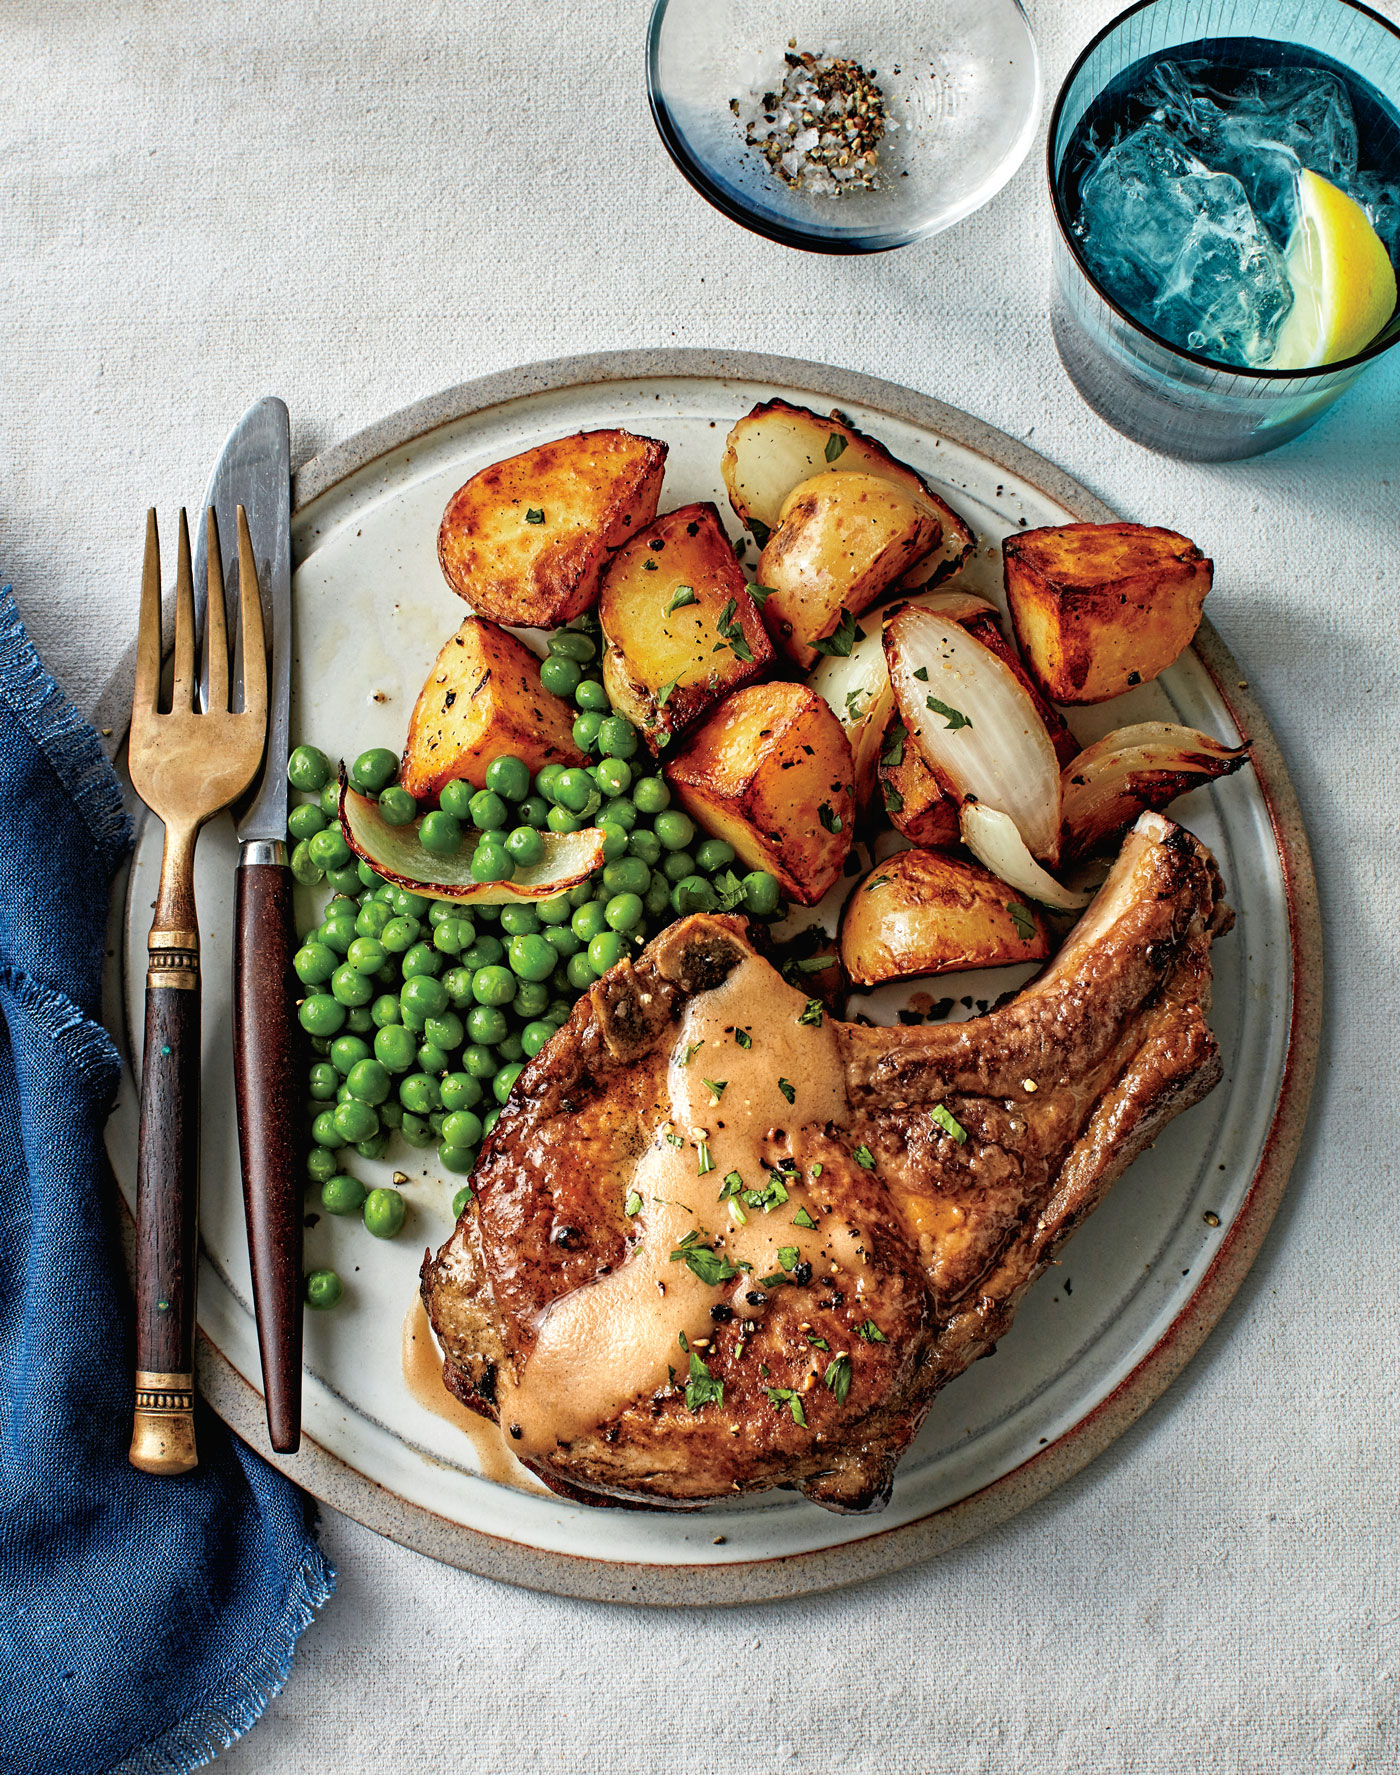 Fried Pork Chops with Peas and Potatoes image